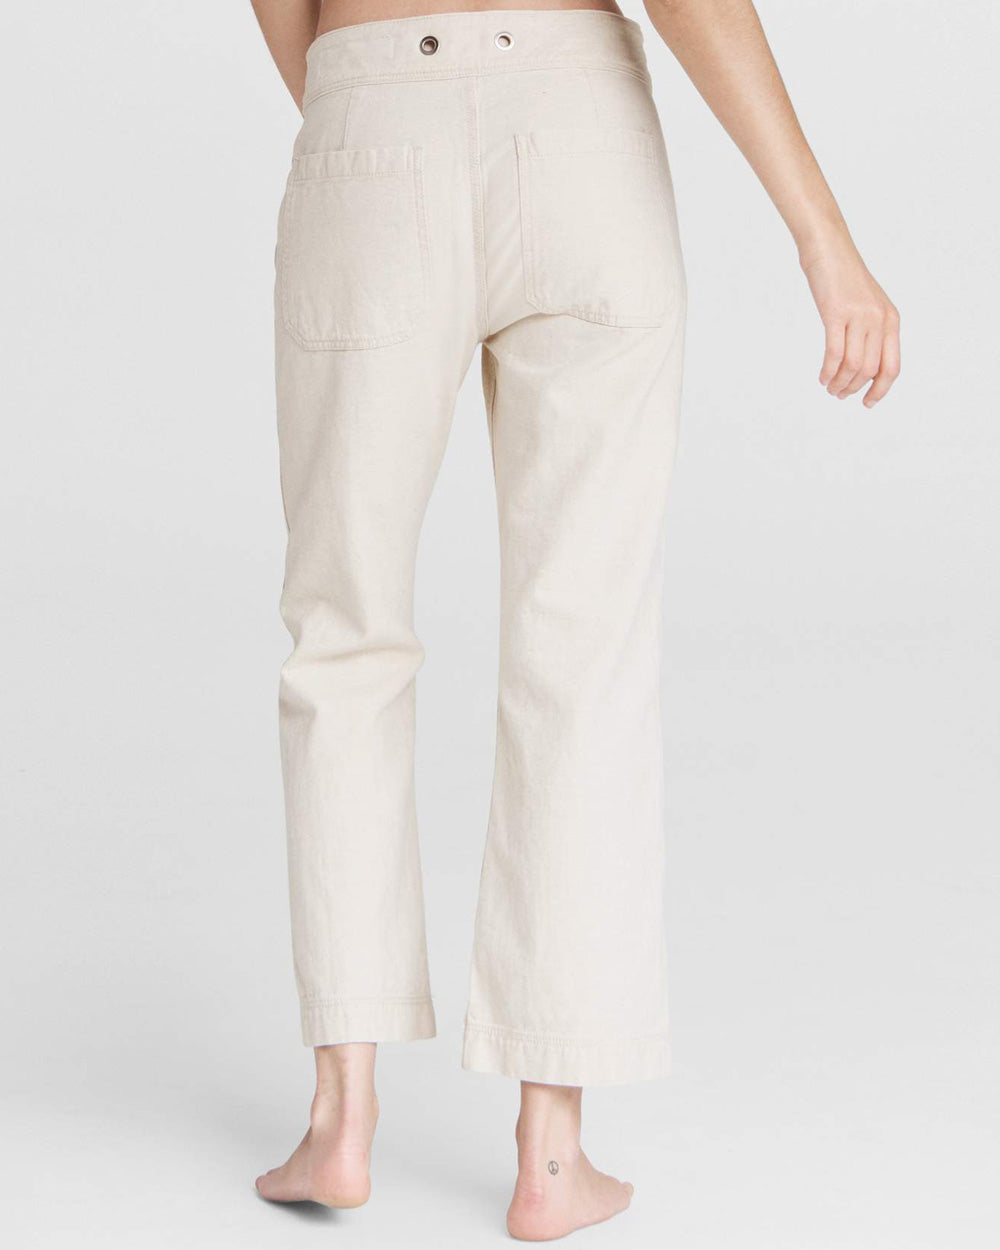 The Naval High Rise Crop Jean in Natural